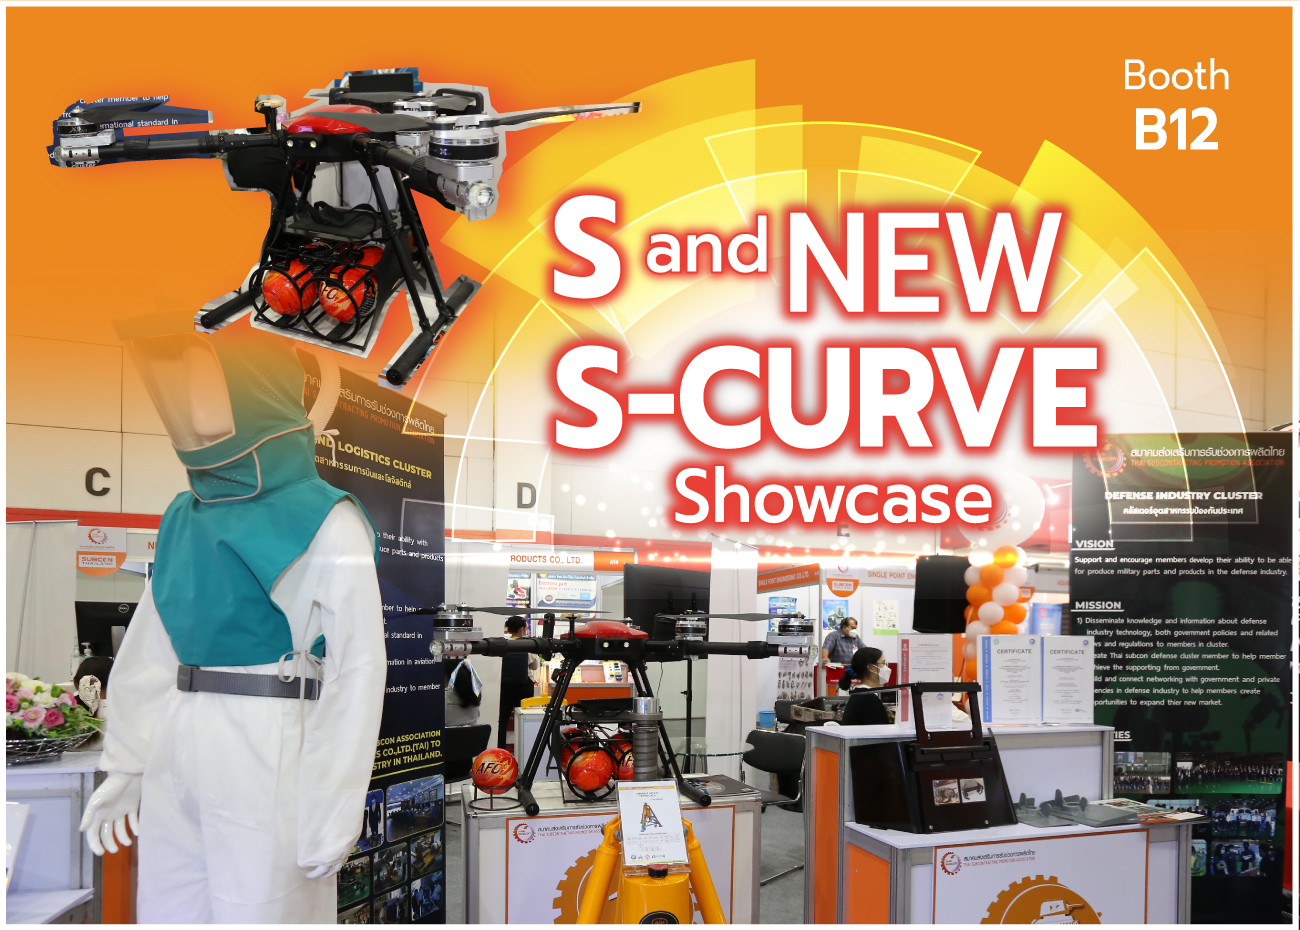 S and New S-Curve Showcase